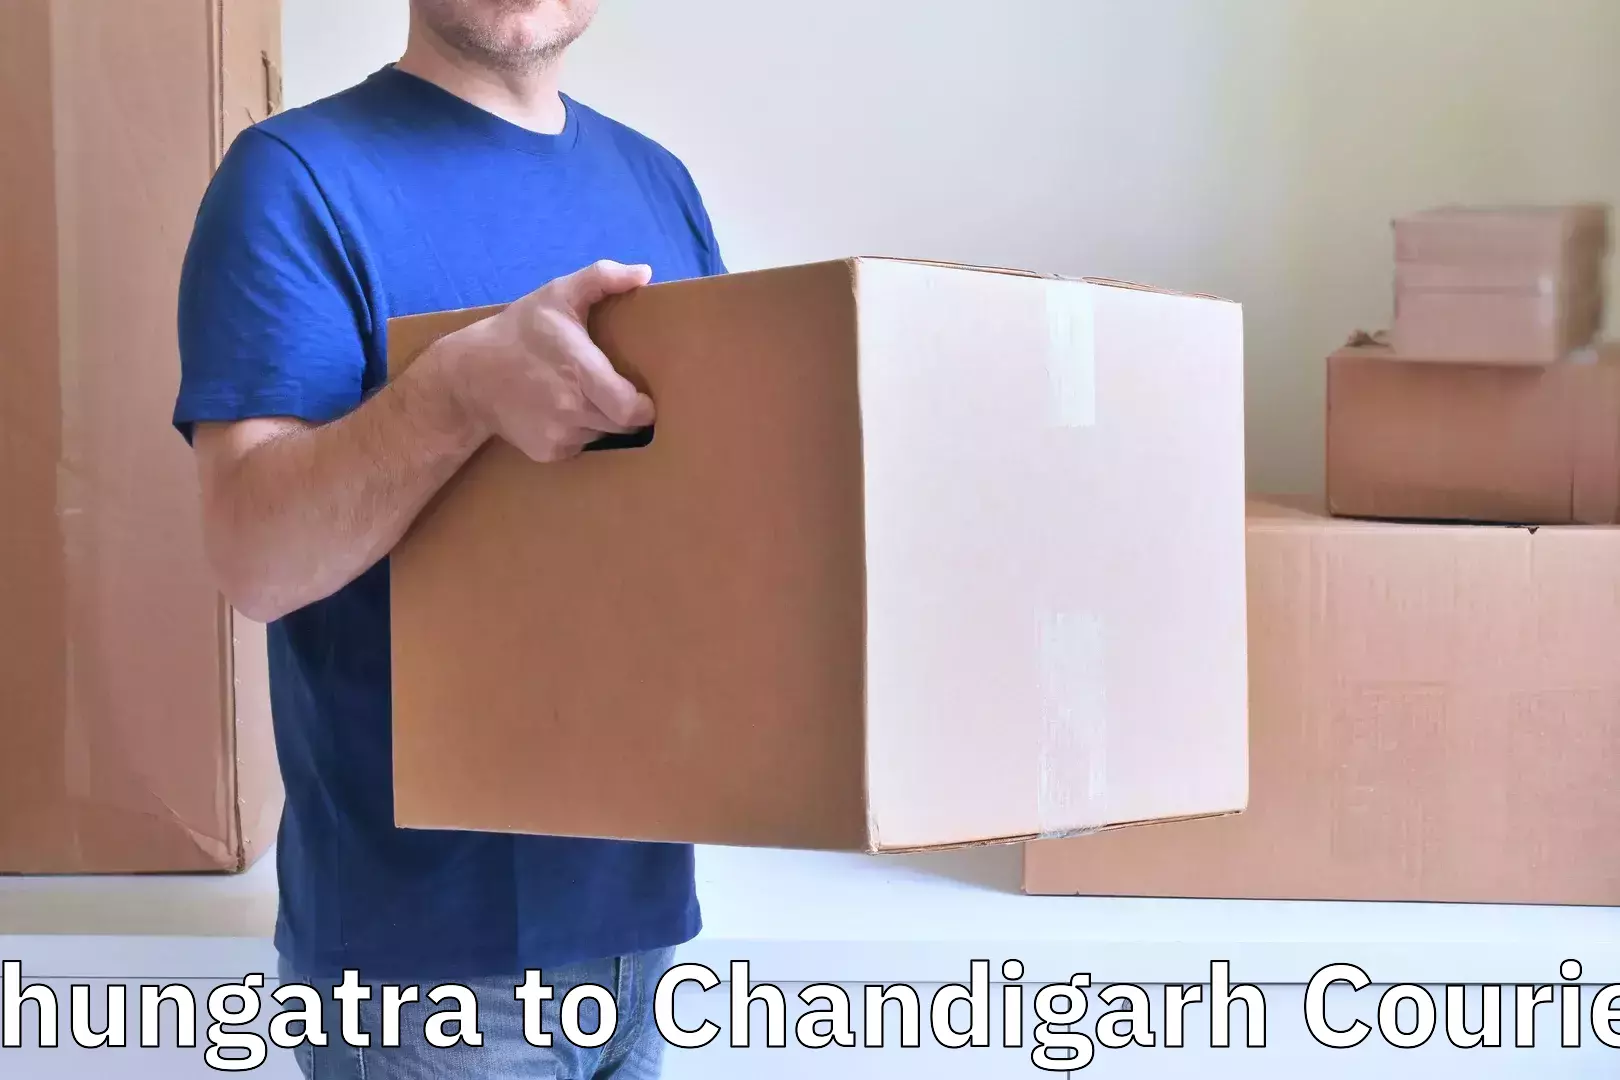 Luggage delivery news Chungatra to Chandigarh